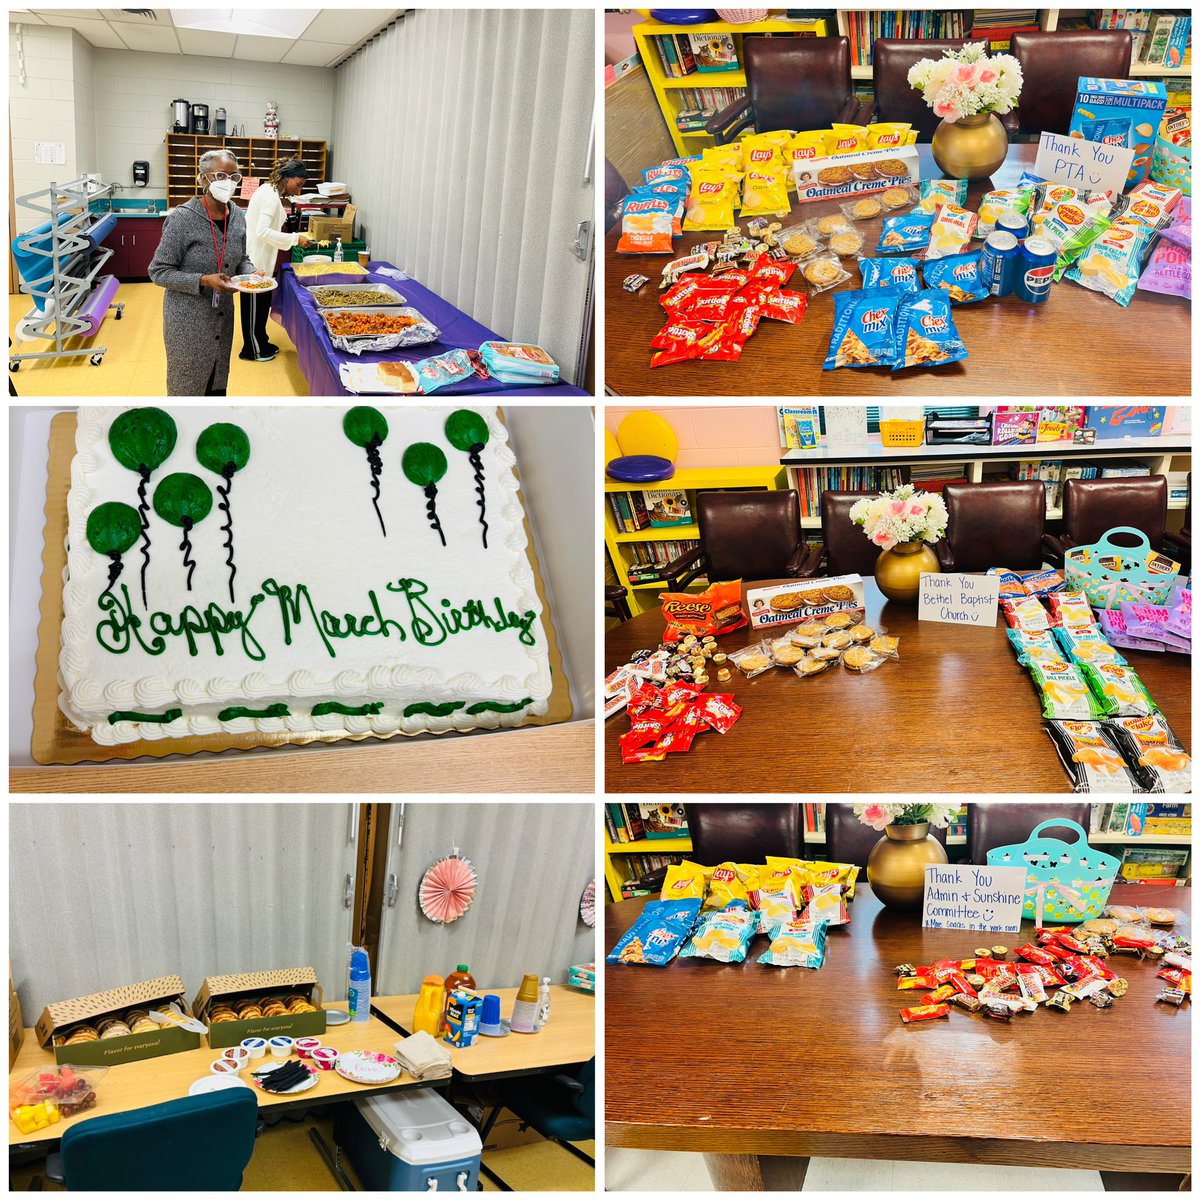 Our PGES teachers are ROCKING out ACAP state testing!! What a great time to set up snacks and lunch for faculty and staff. We are so PROUD of PGES teachers and staff! Thanks to the PTA, Admin, Bethel Baptist, and the Sunshine Committee for your help.